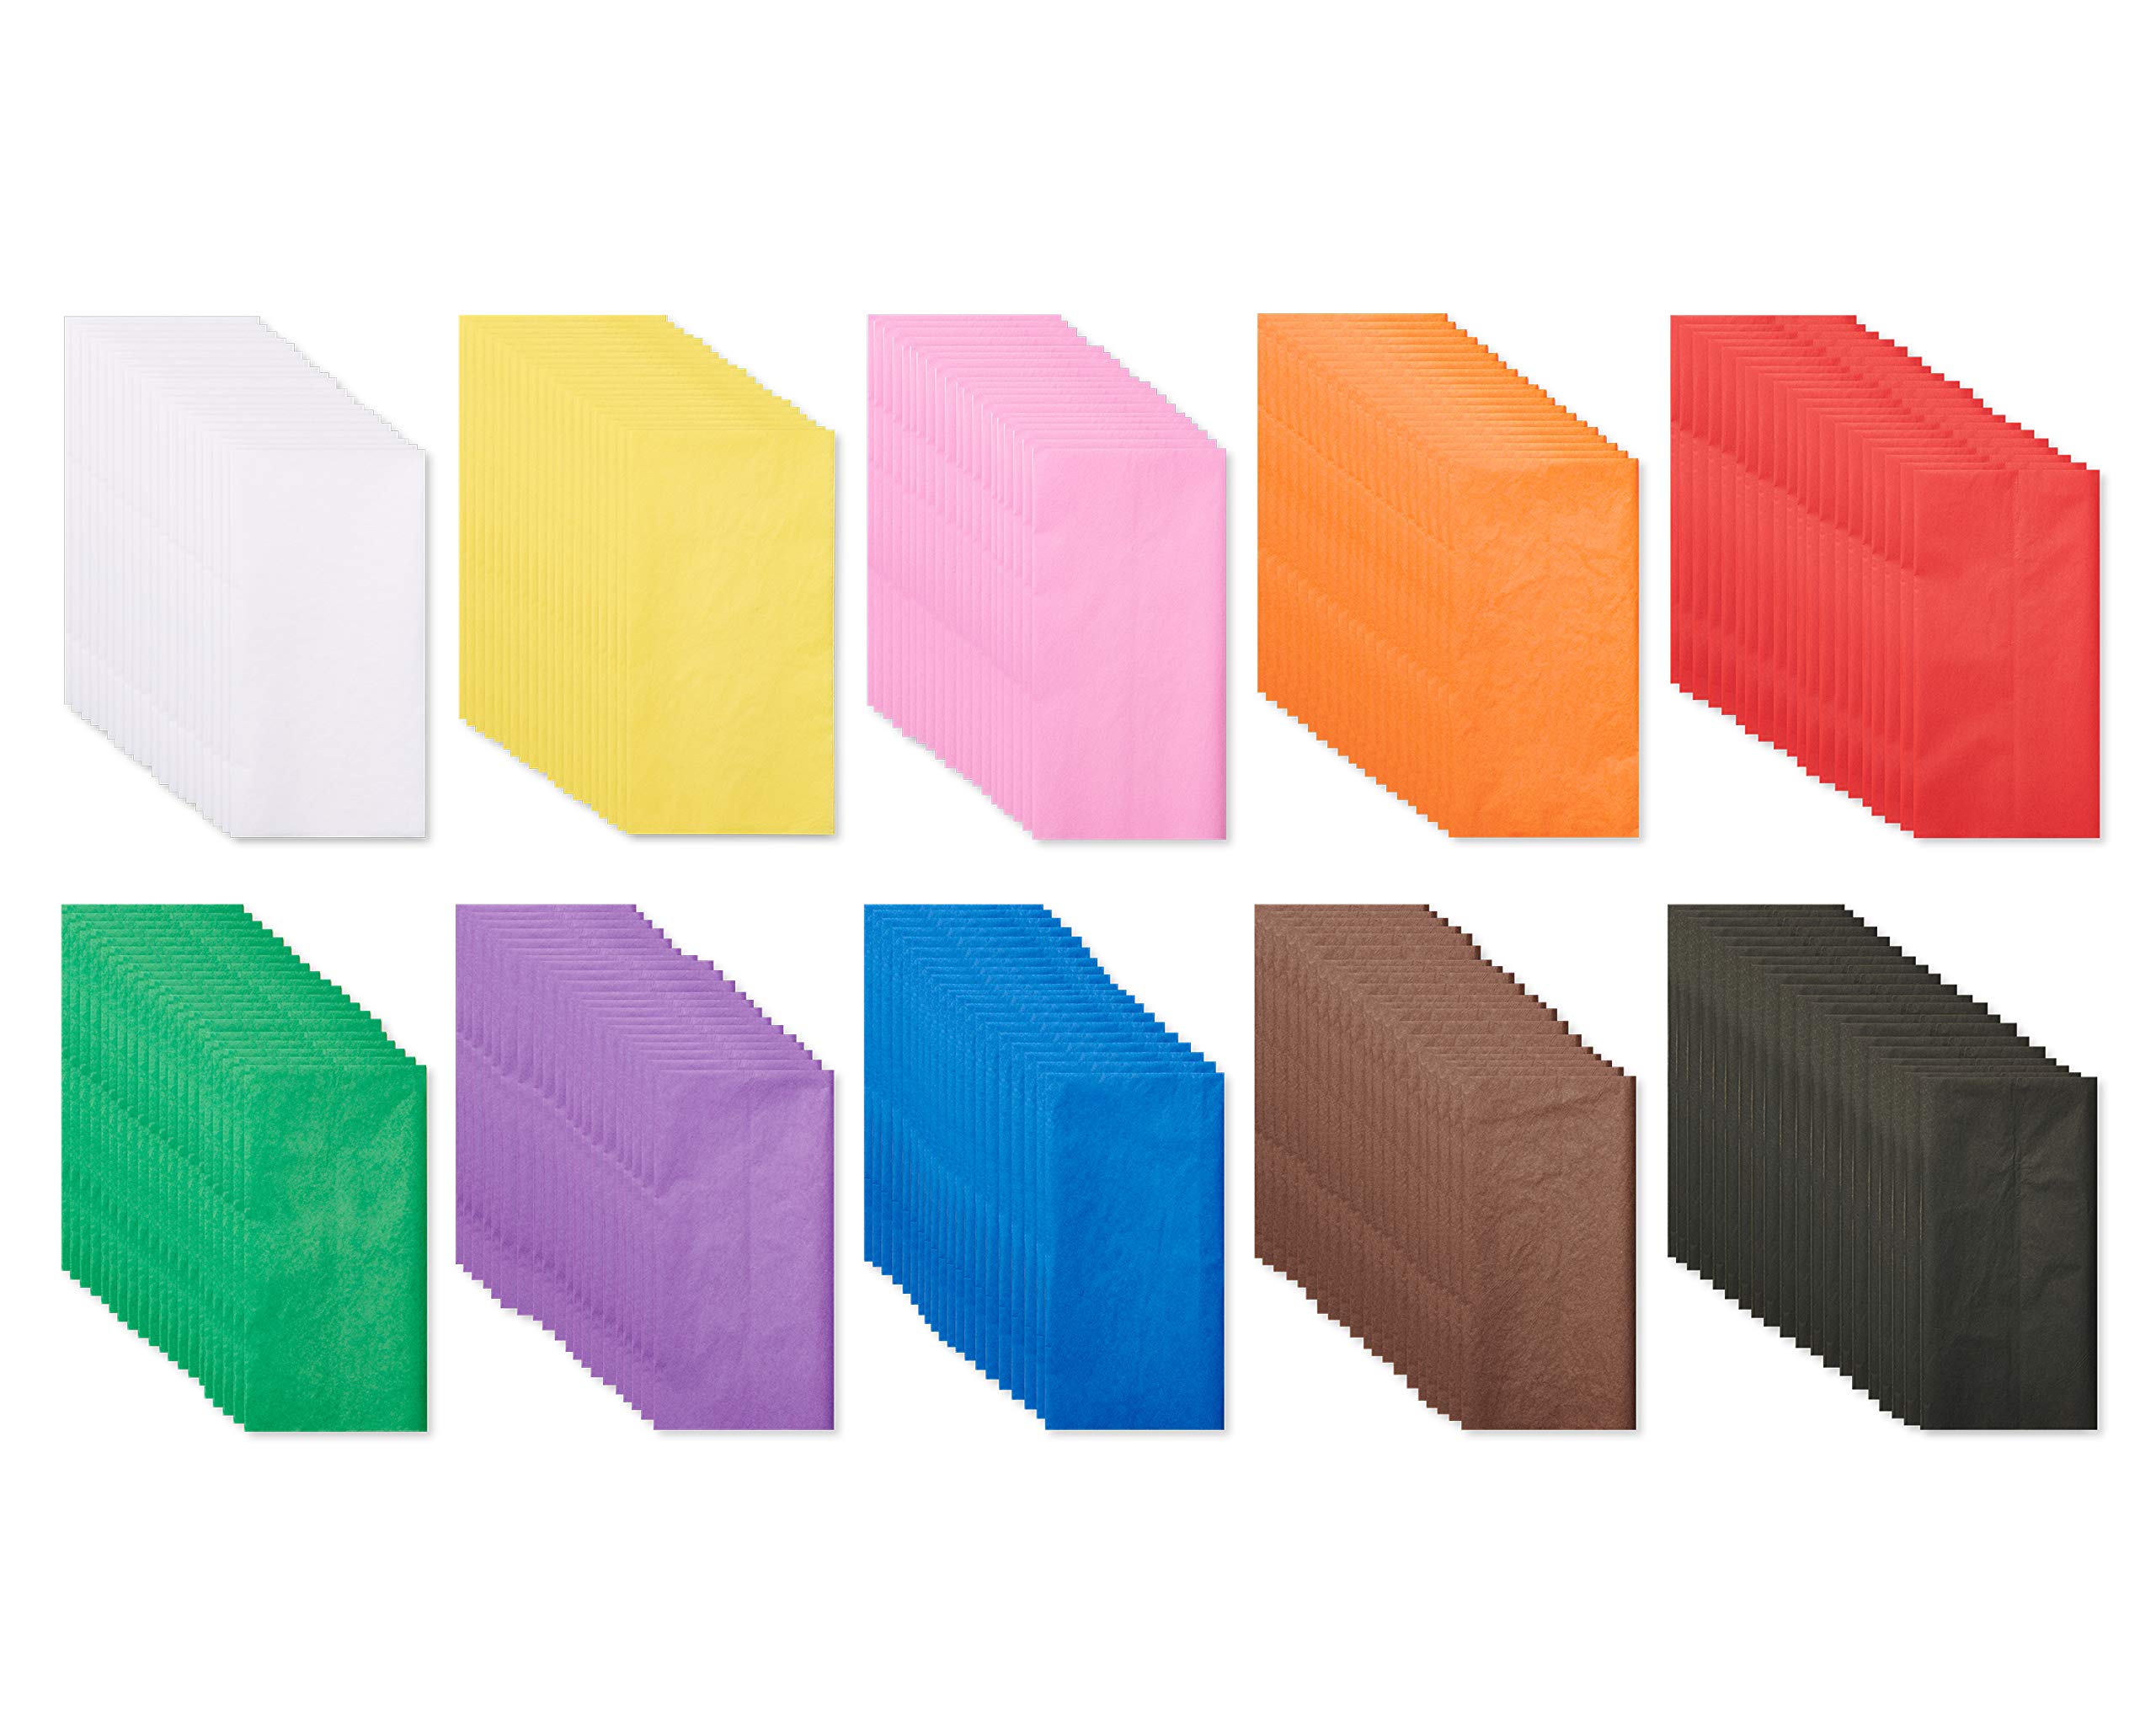 American Greetings 200 Sheets 20 in. x 20 in. Rainbow Tissue Paper Bulk for Valentines Day, Birthdays, and All Occasions